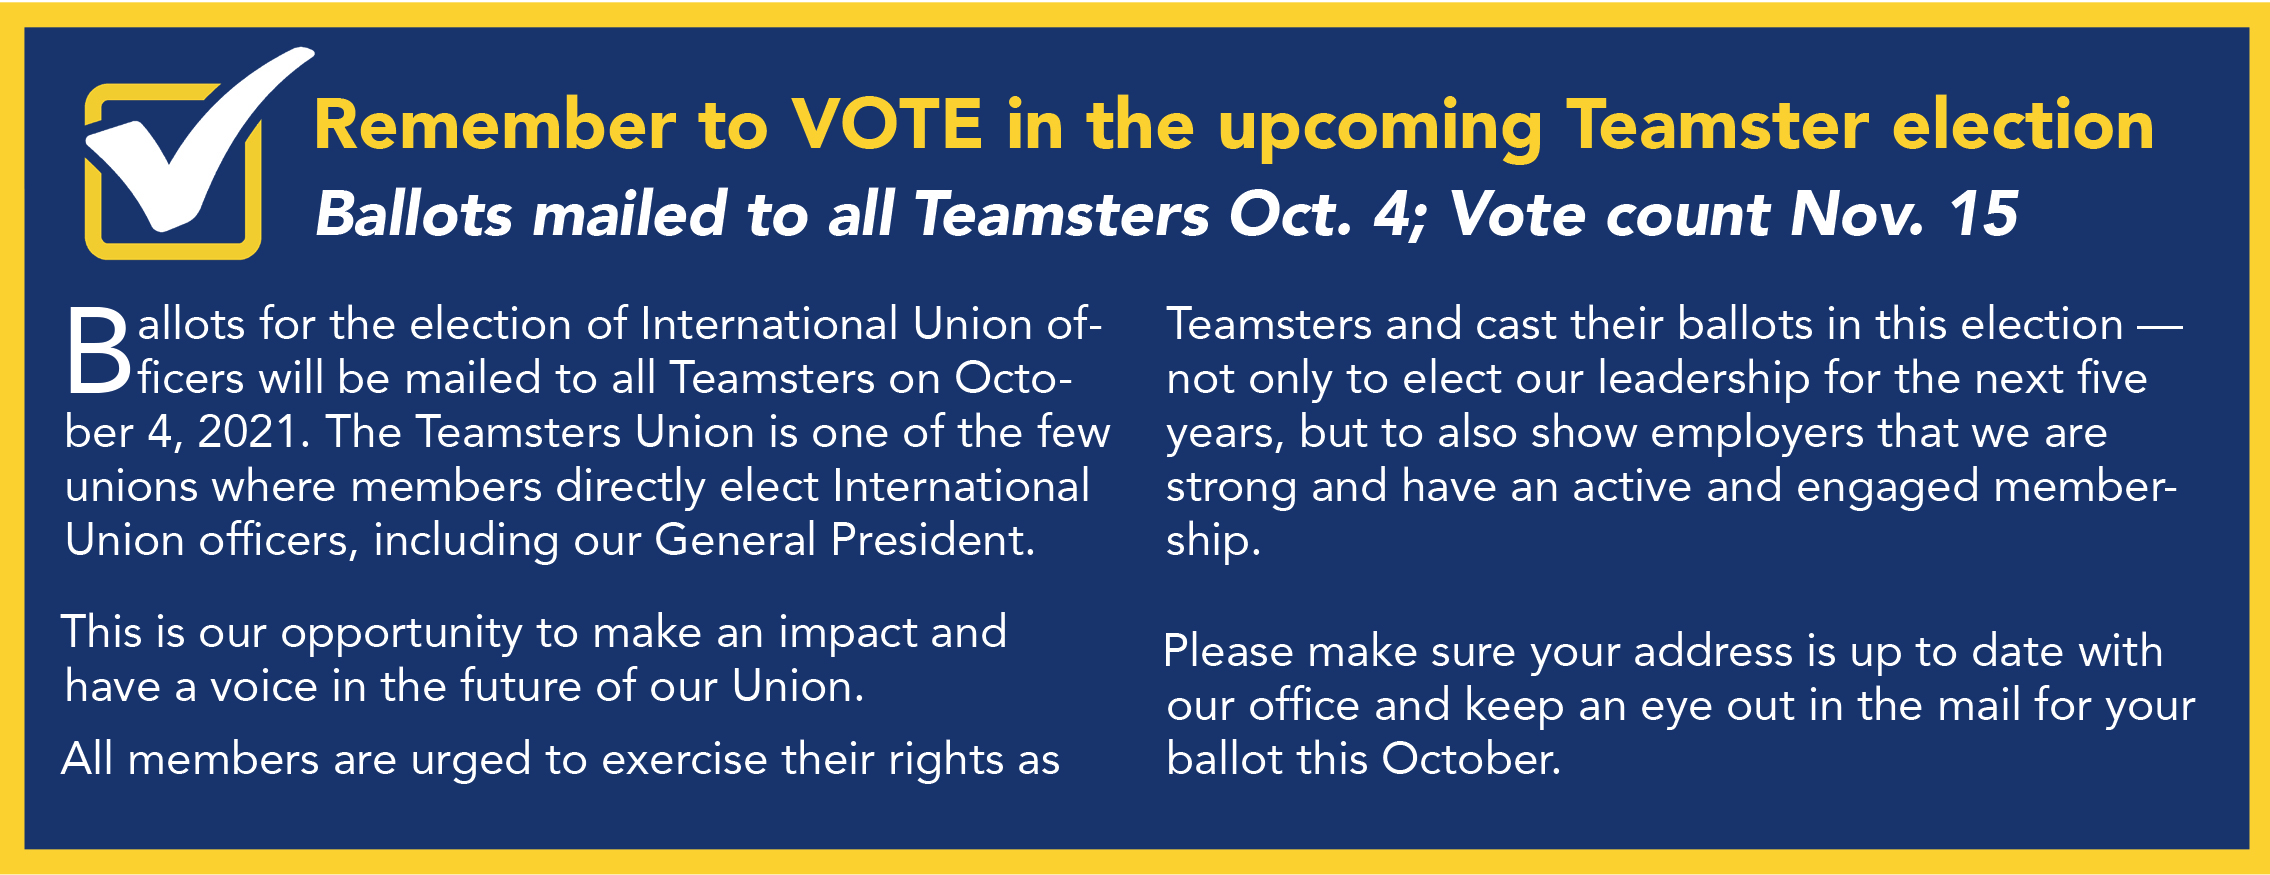 Remember to vote in the upcoming Teamster election